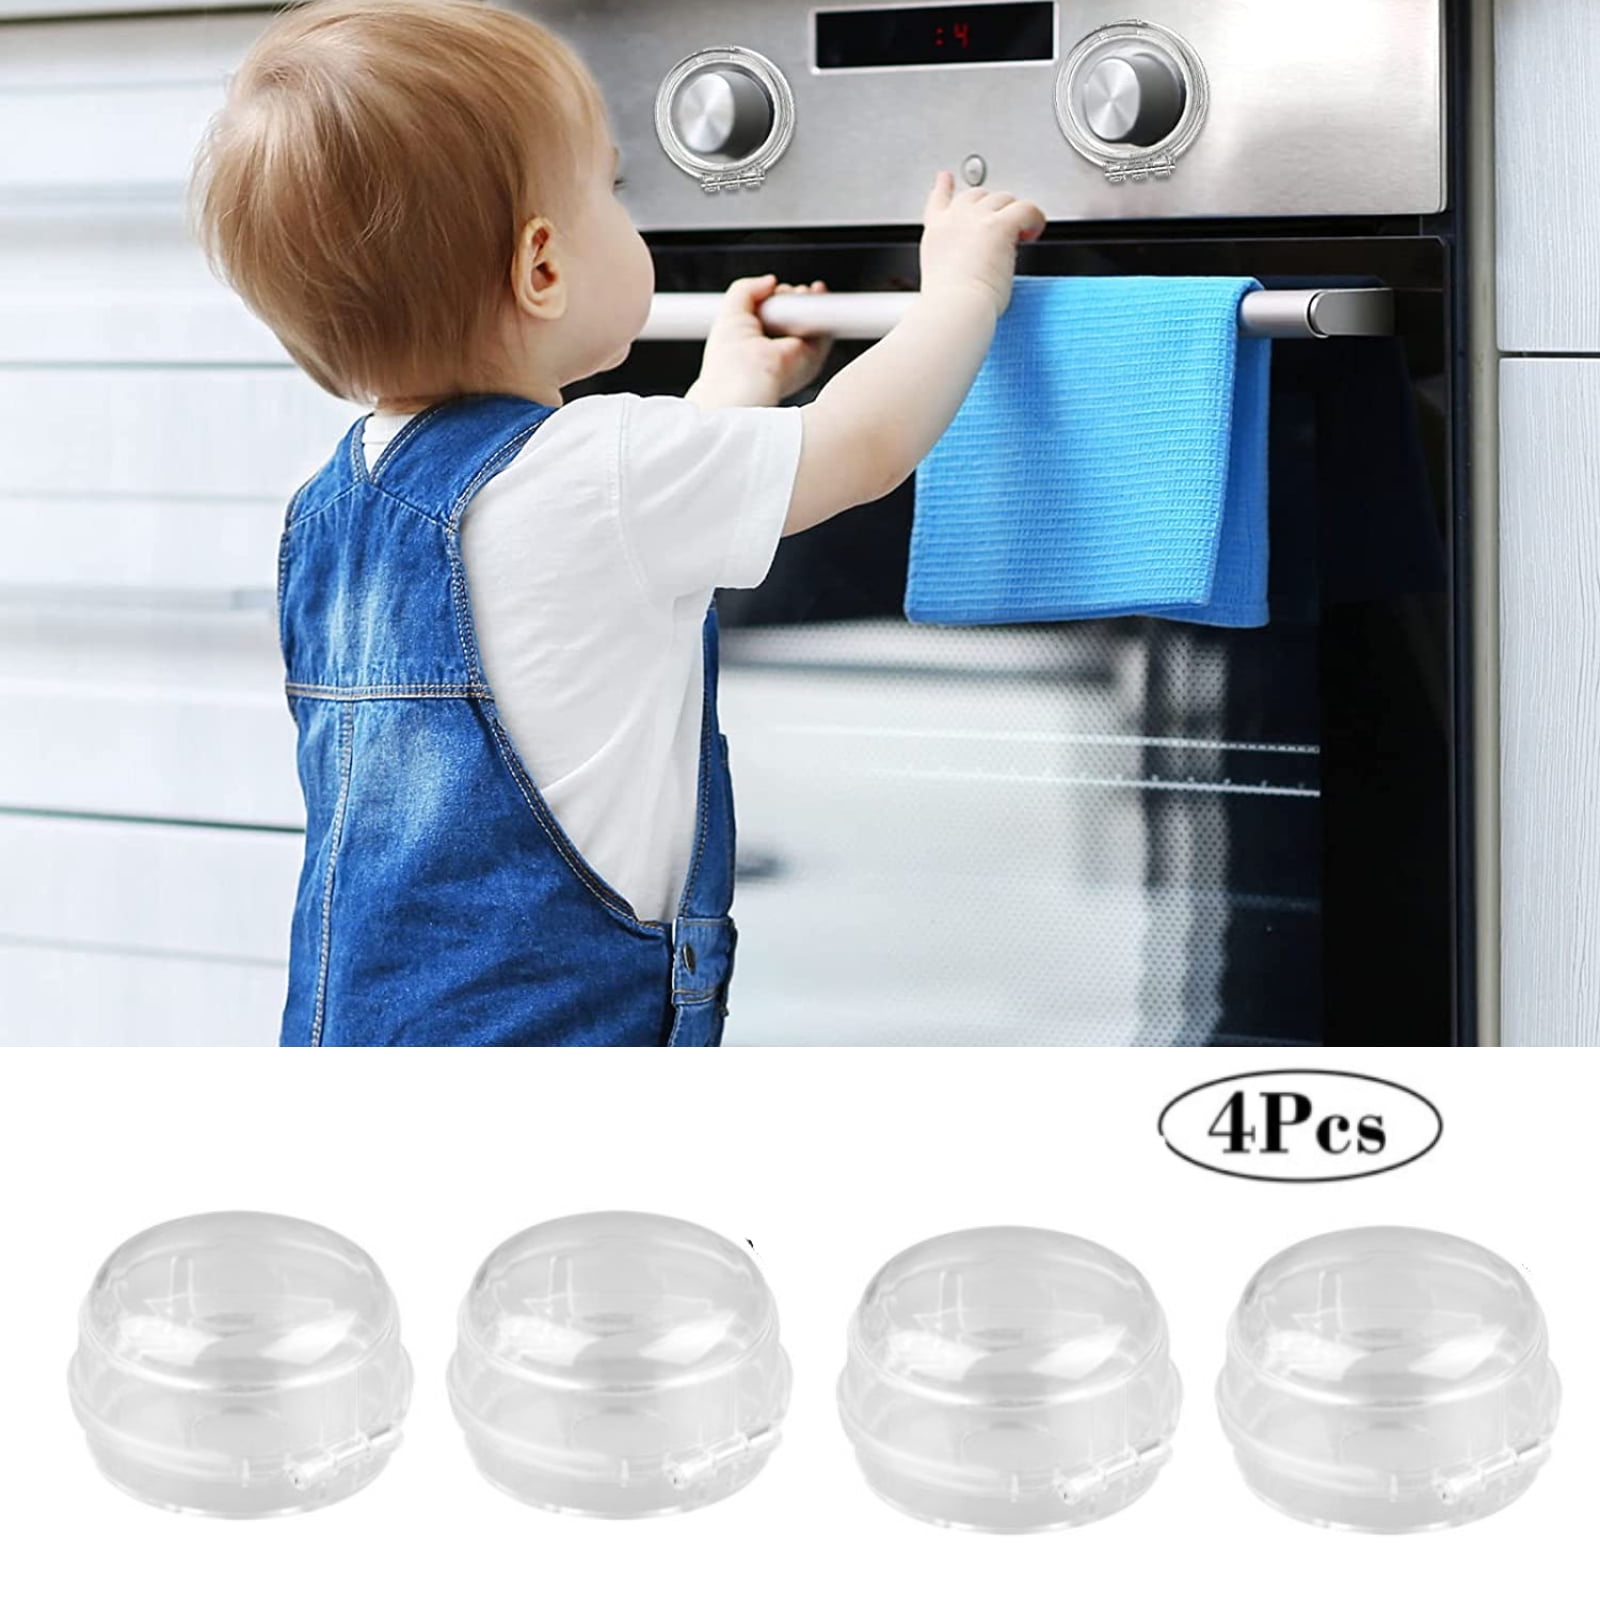 Gas Stove Knob Covers Child Toddler Baby Safety Lock Protection Covers for Oven Range Grill Knob Removable Reusable Clear Design 